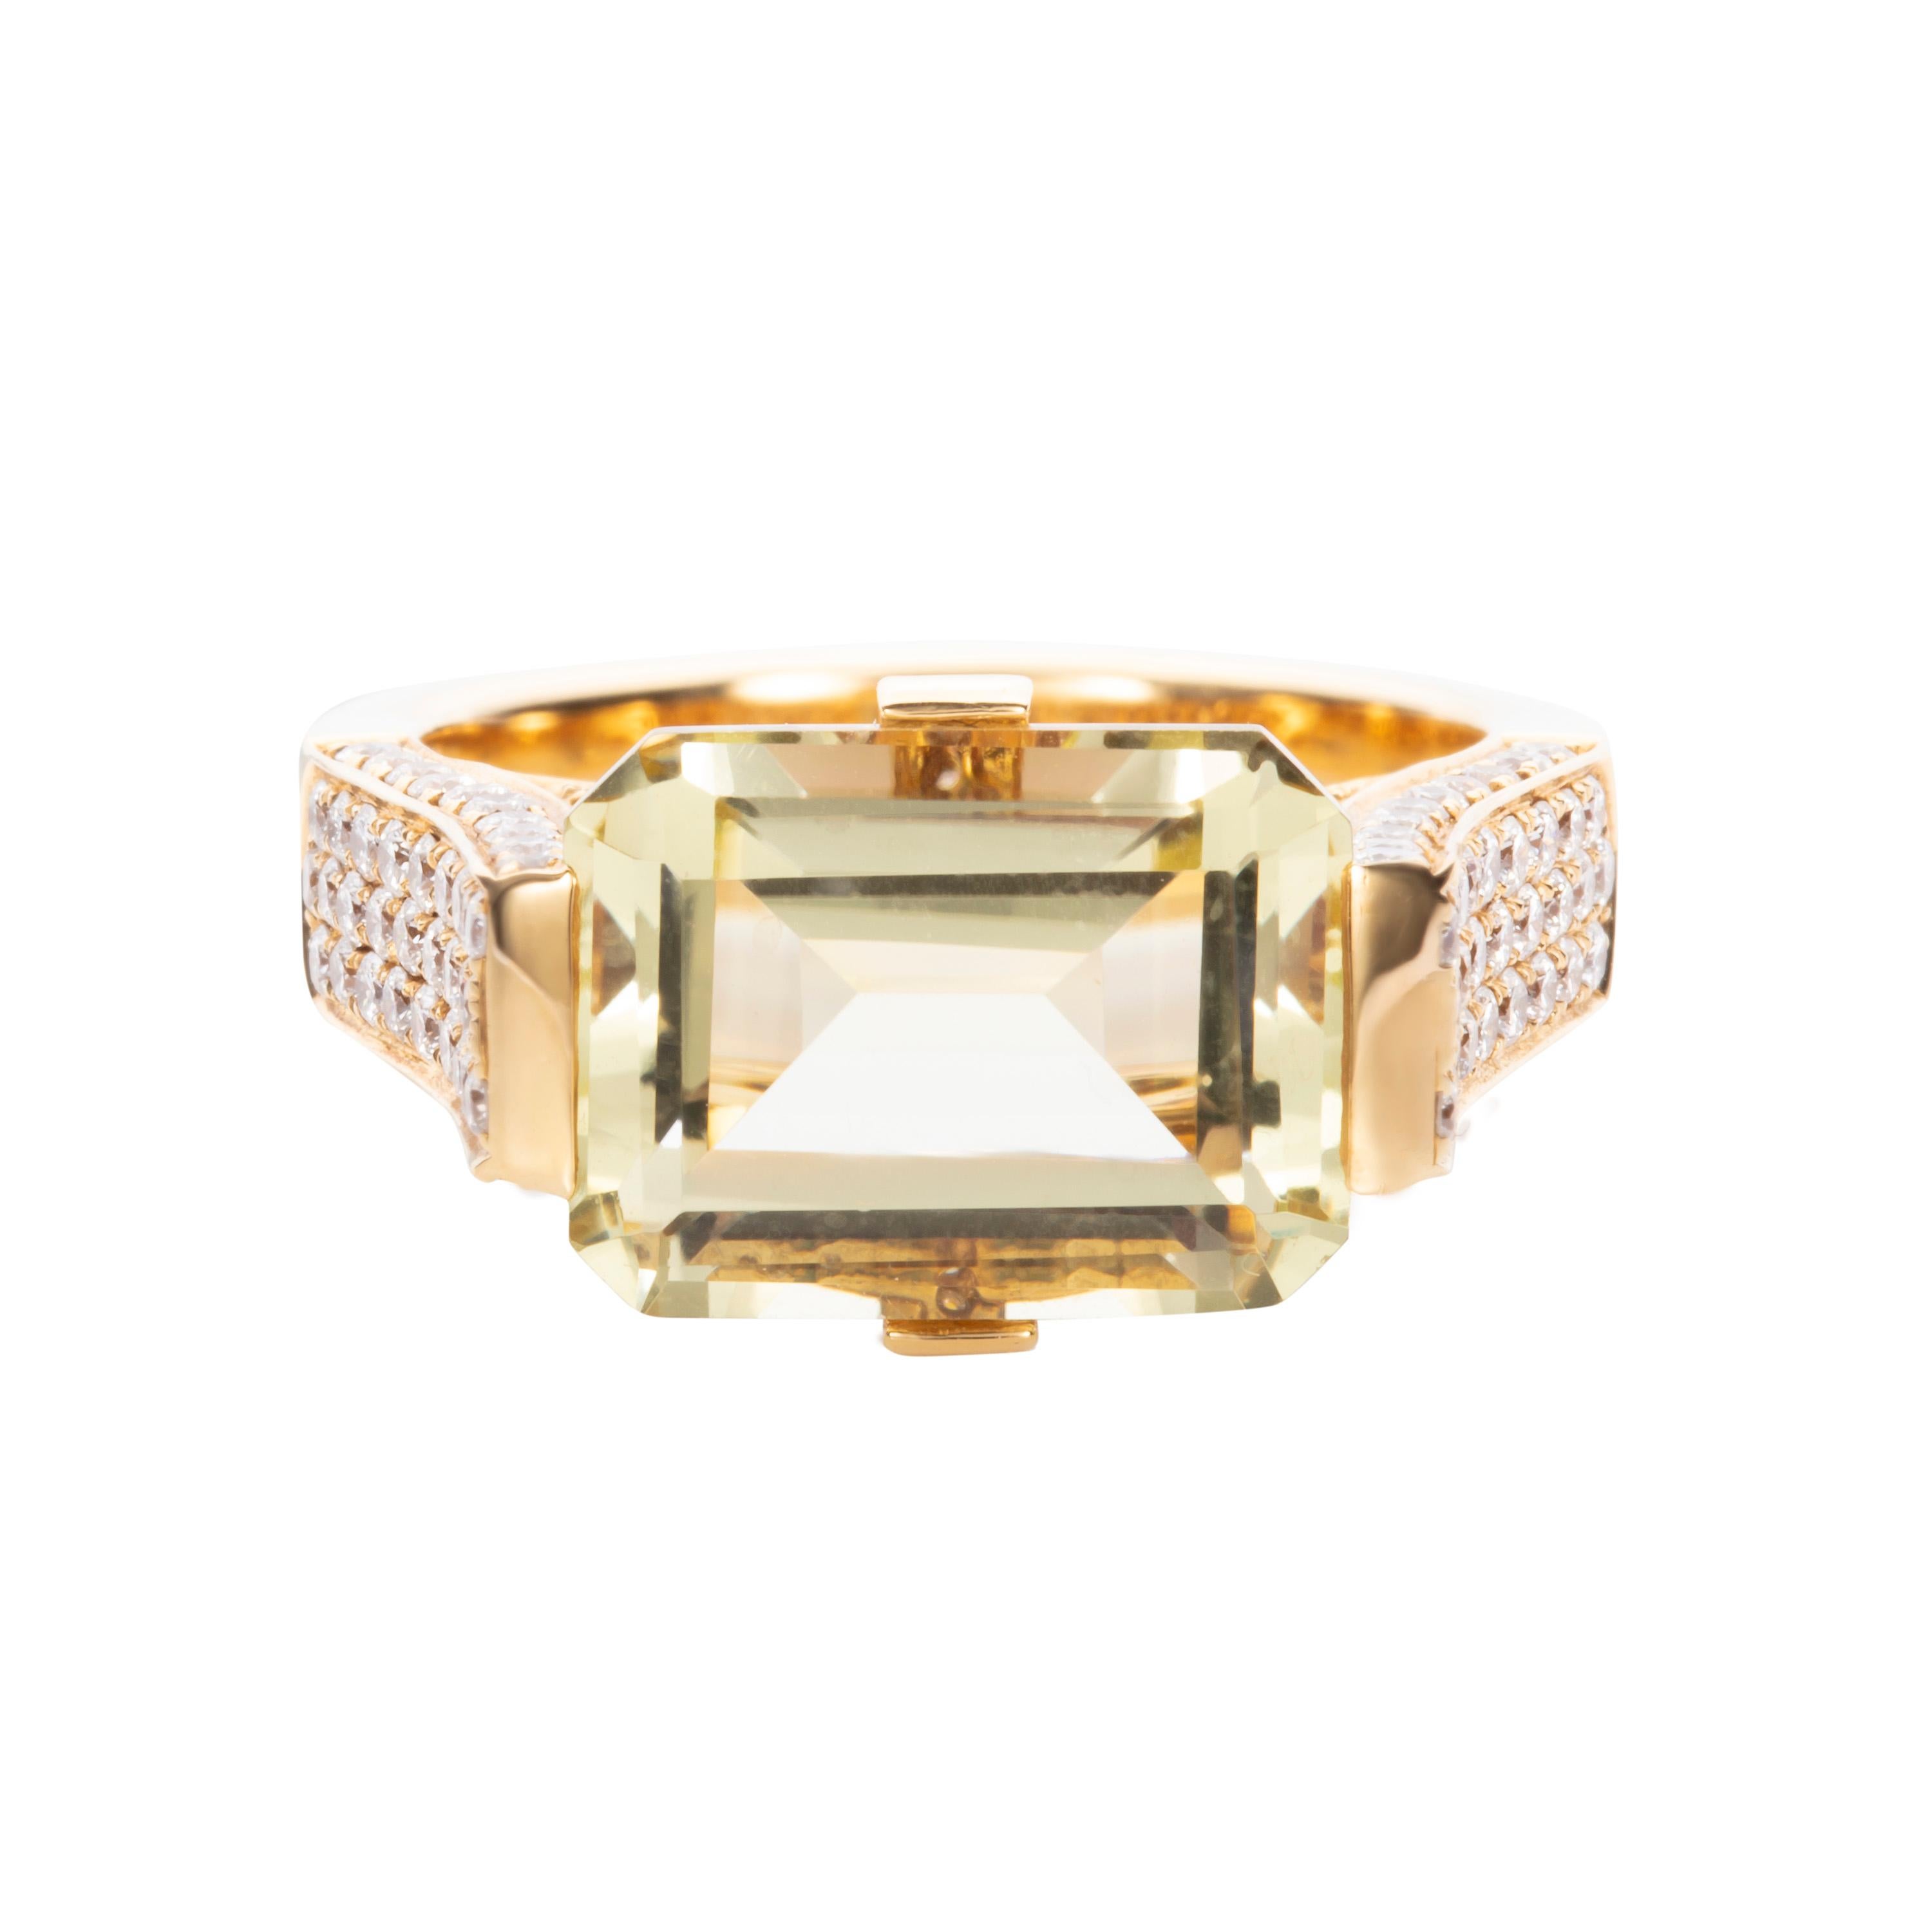 Rendered in lustrous 18-karat yellow gold, Butani's ring is centered with an unmissable 5.19 carat lemon topaz surrounded 1.0 carats of sparkling white diamonds.  Gift yours to a friend or loved one.  Currently a ring size US 7.  For other sizes,